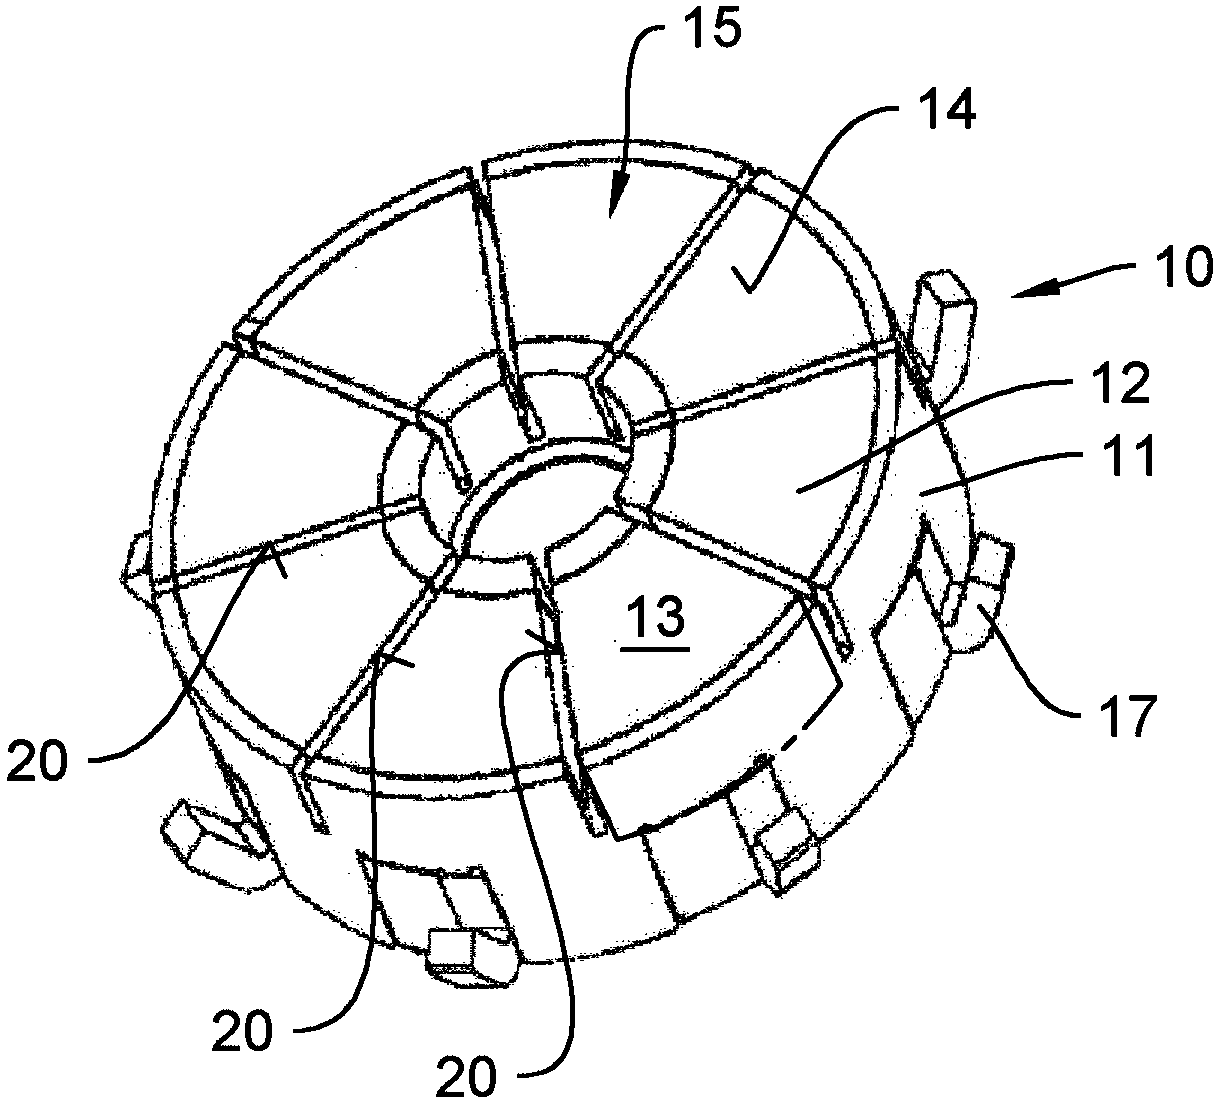 Disc blank for producing commutator laminations